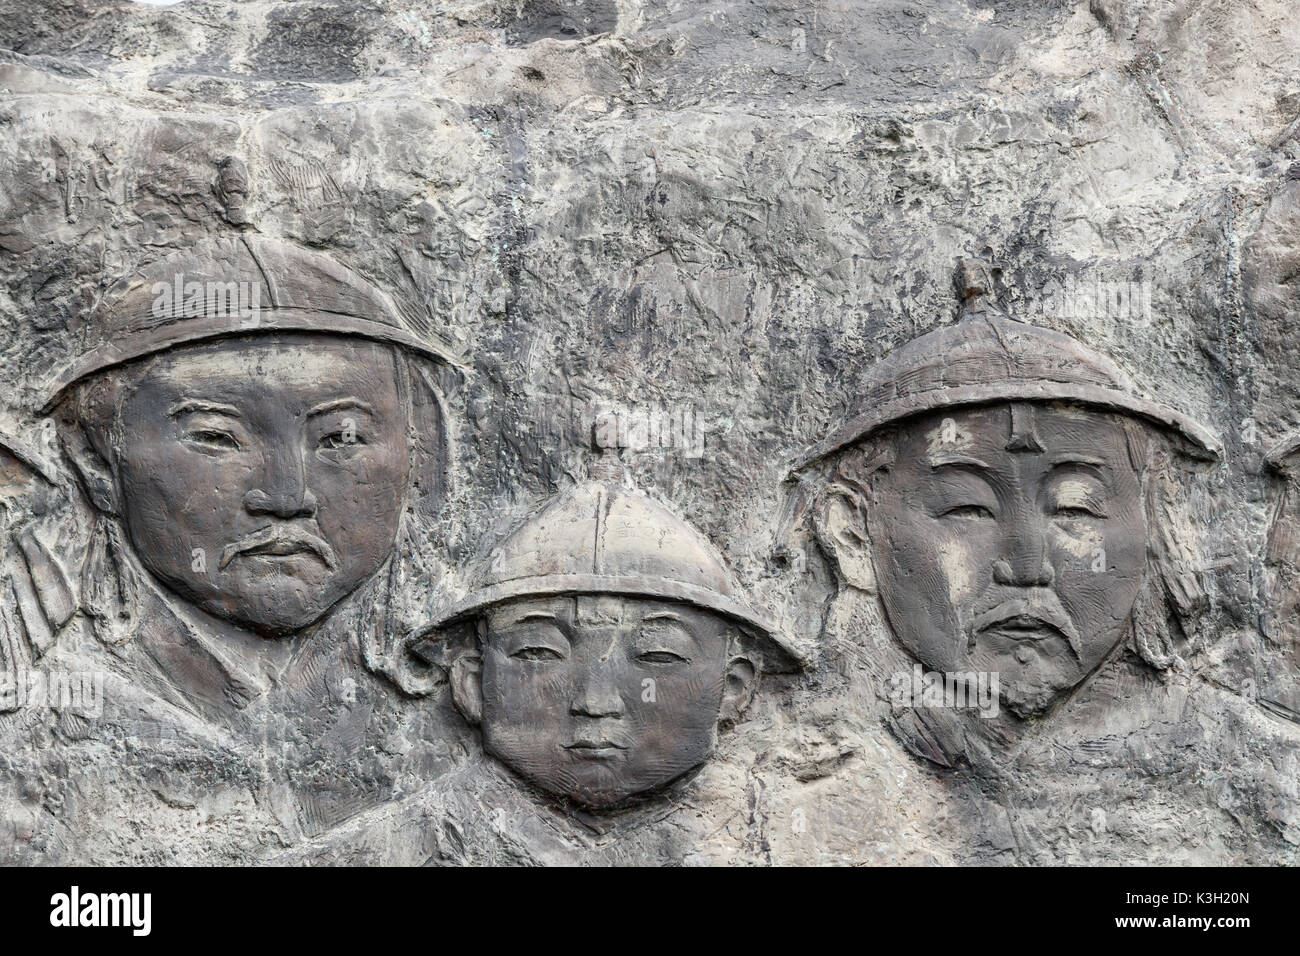 The site of Xanadu, Inner Mongolia, China - July 26, 2017: Reliefs and the statue of Kublai Khan grandson of Genghis Khan.The site under the protecti Stock Photo